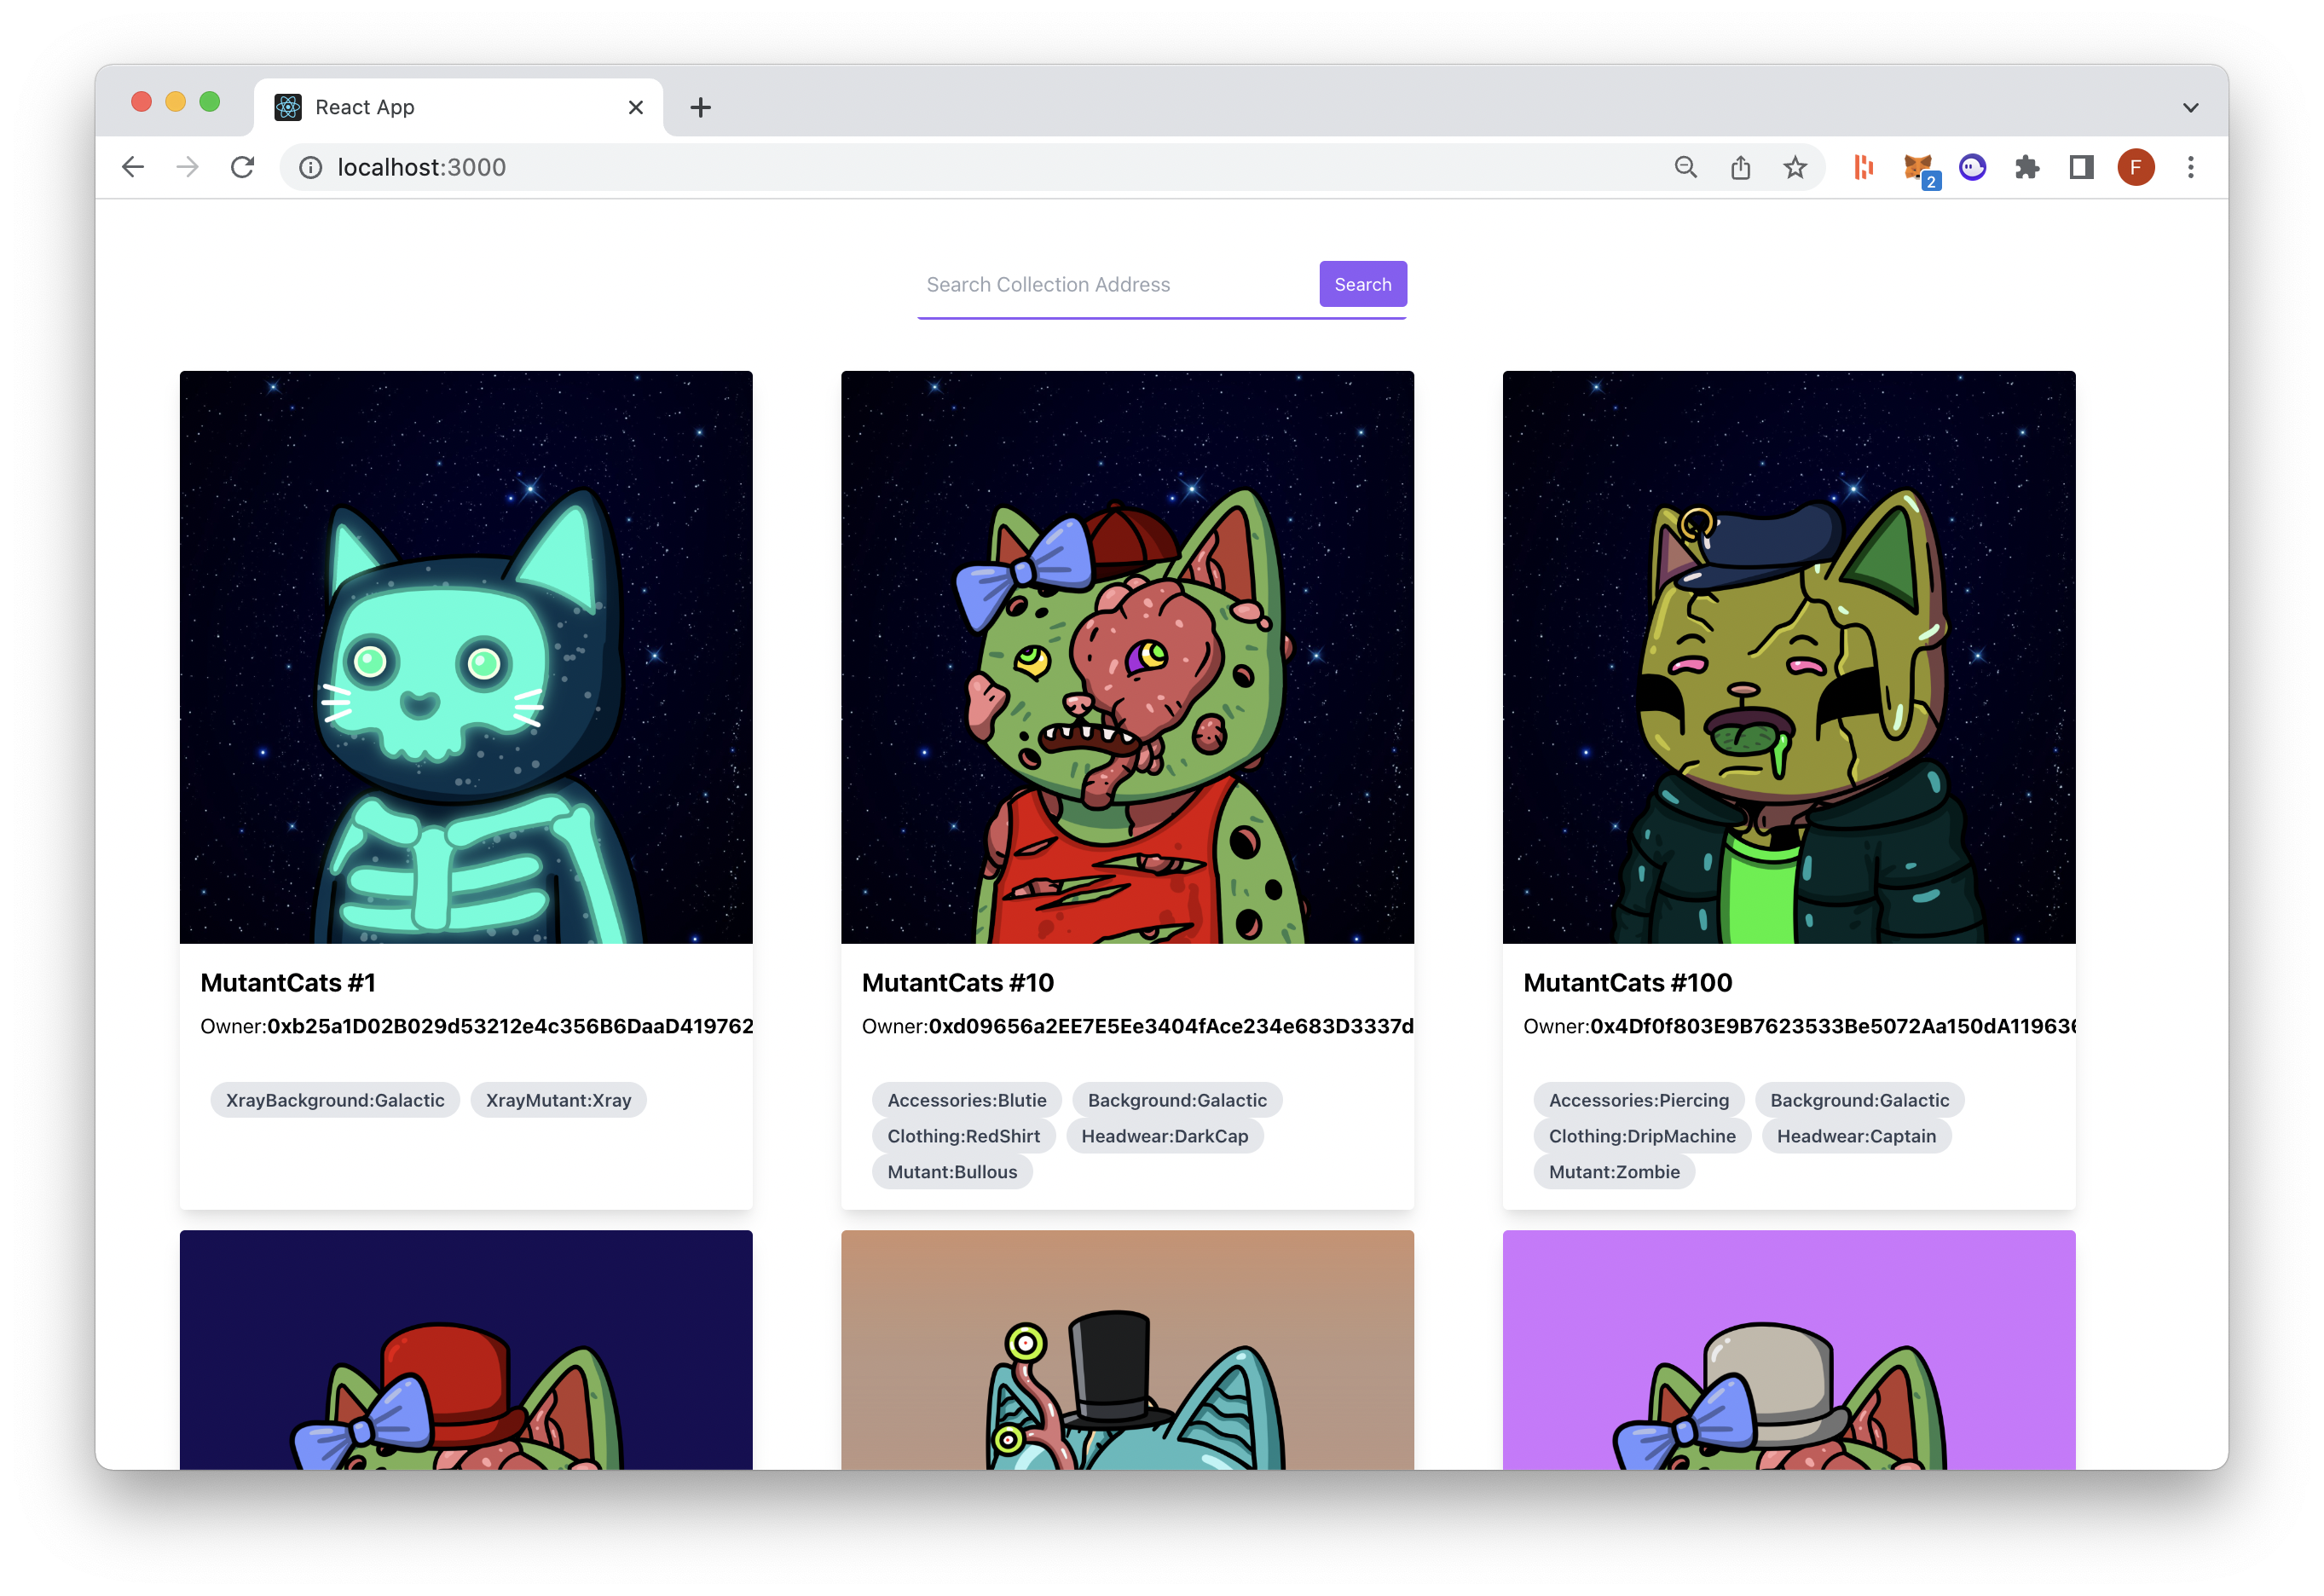 React App displaying the NFT Gallery